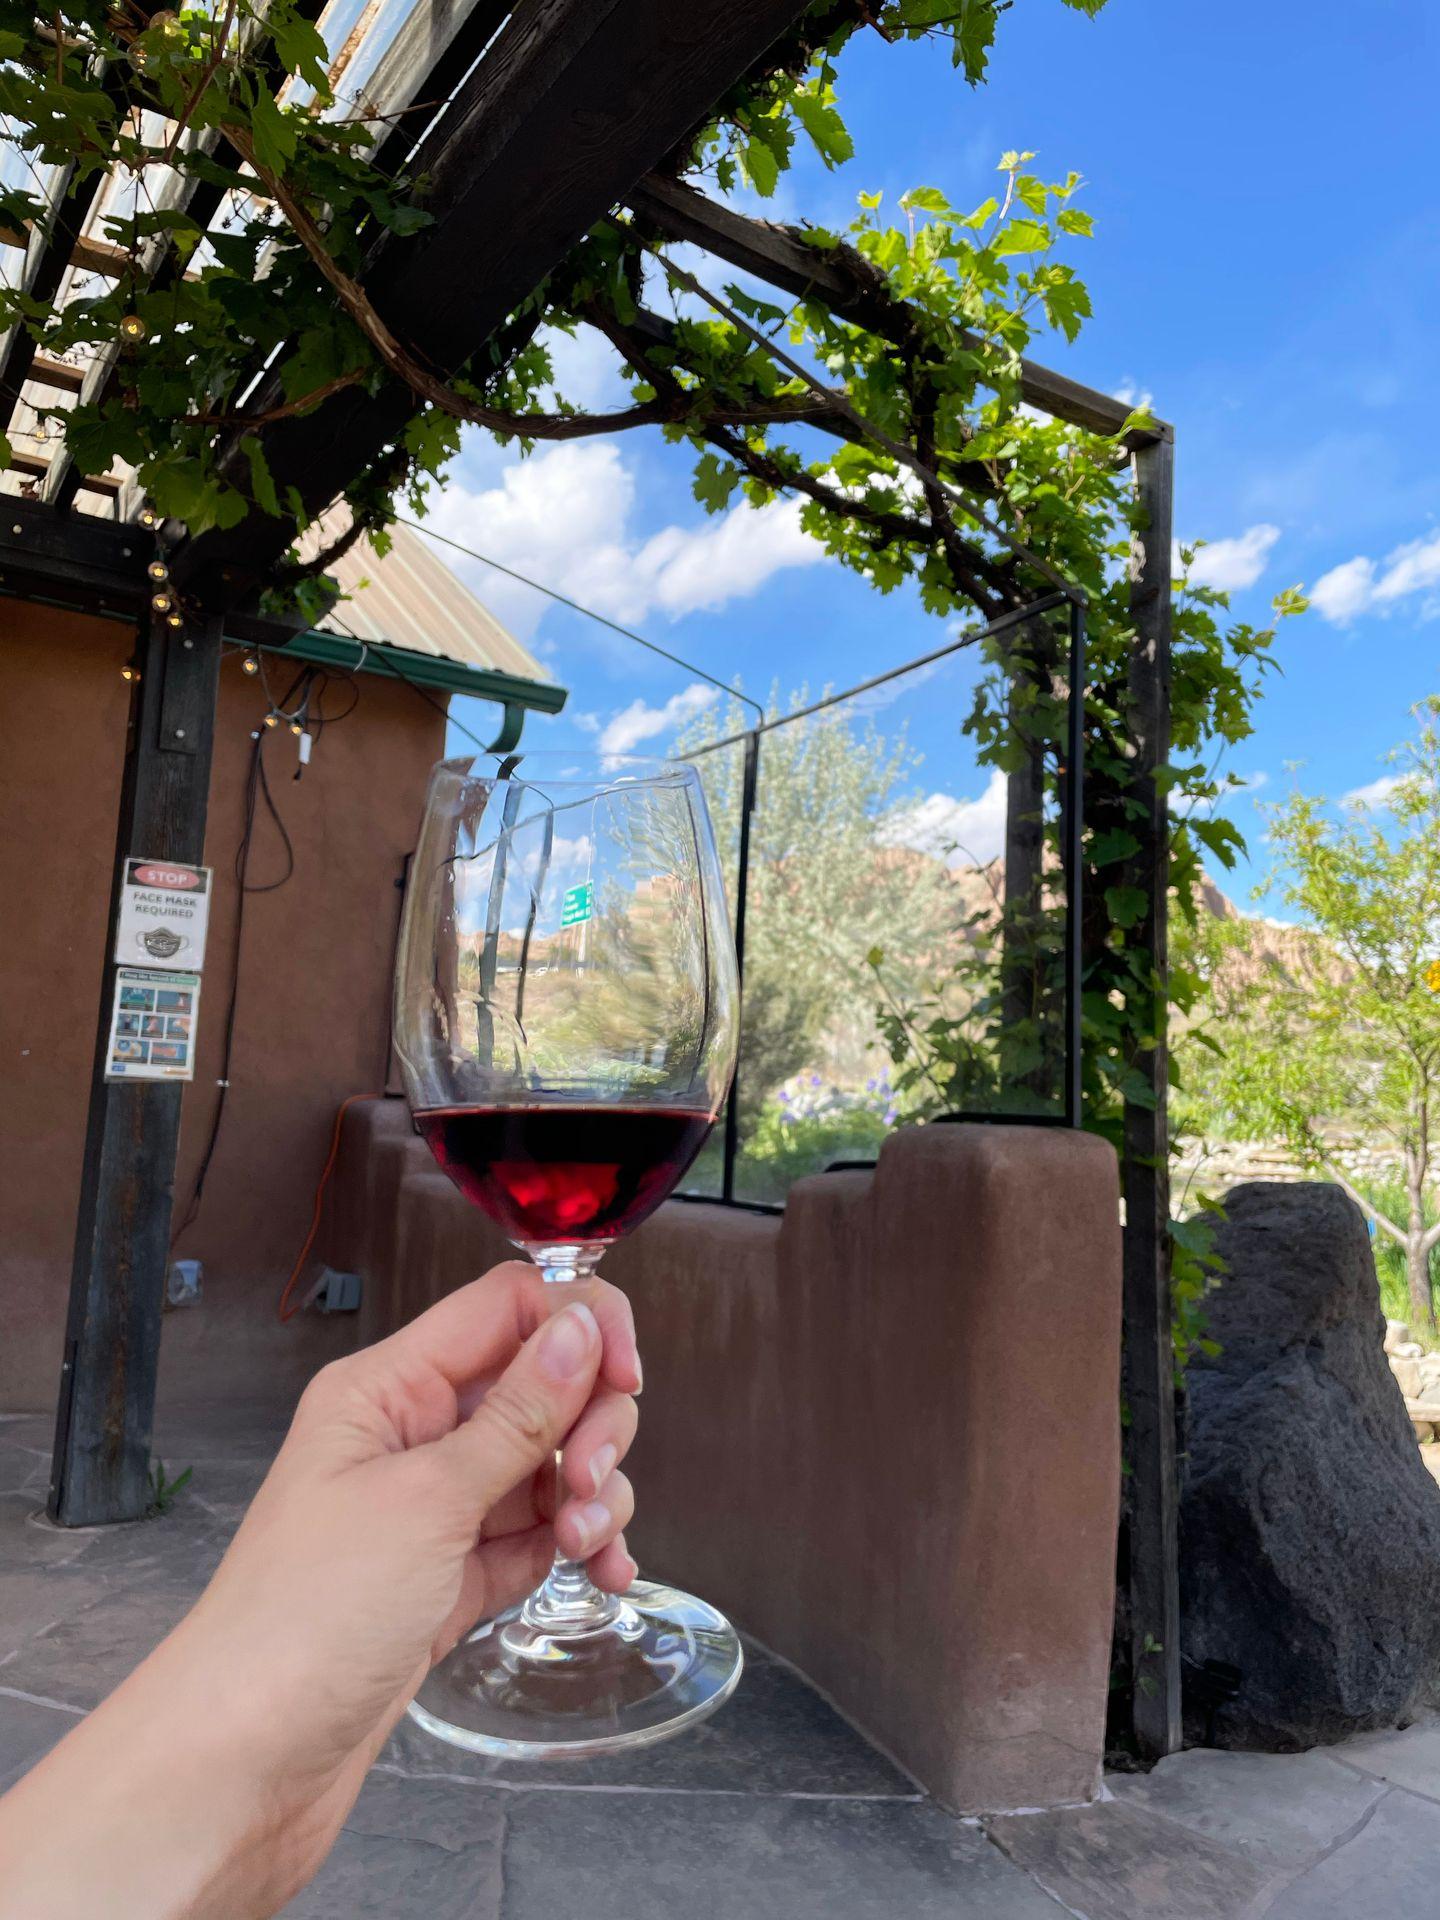 Holding up a glass of red wine in front of a structure that has green vines hanging from the edges.